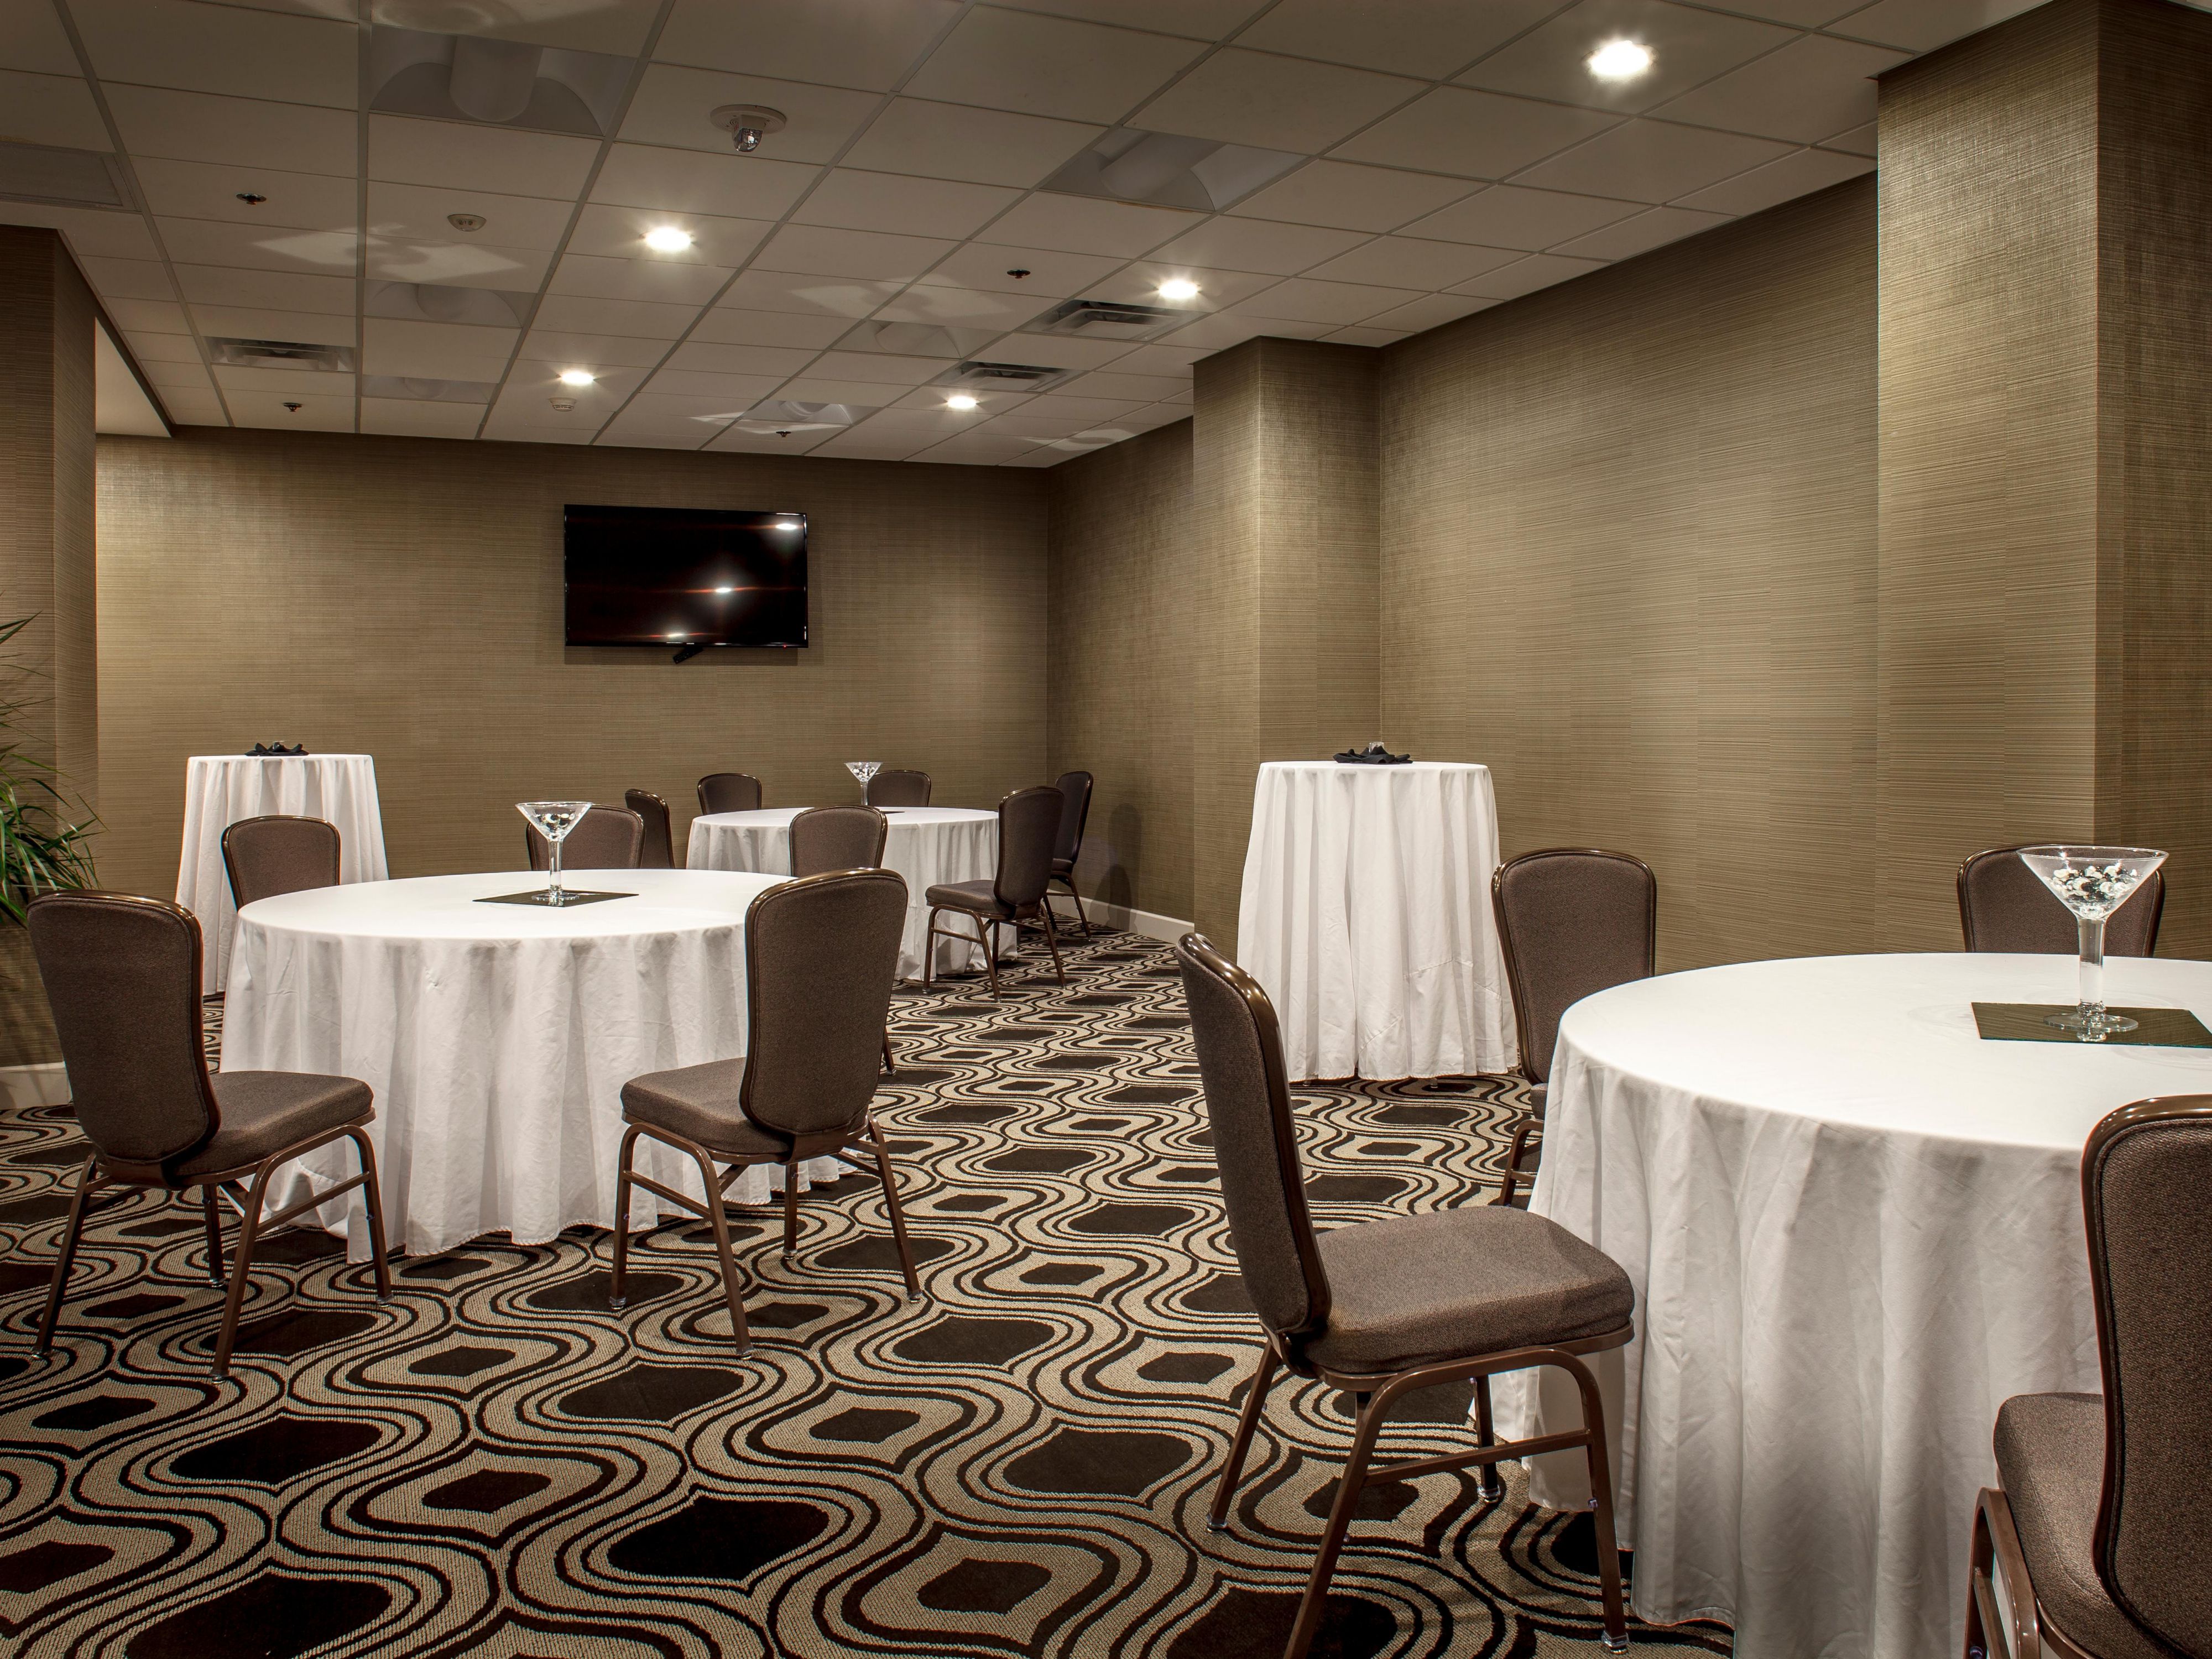 Host your Phoenix event in style at our full-service airport hotel with free shuttle and easy Light Rail access. With 11 versatile venues, including a ballroom for up to 500 guests and 15,000 sq ft of modern event space, we are ideal for business meetings, conferences, and social gatherings.